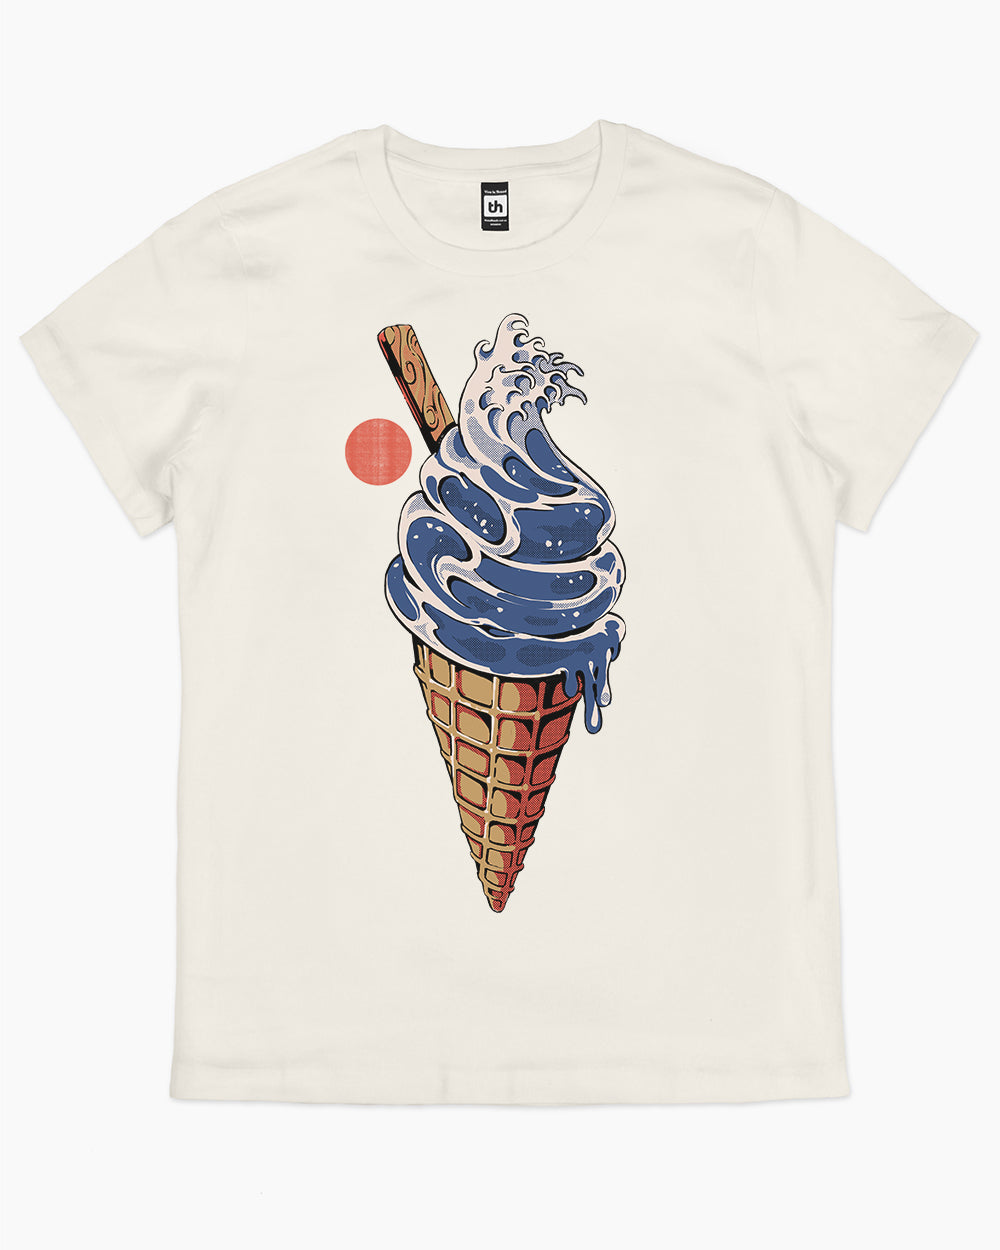 Icecream Aesthetic T-Shirts for Sale